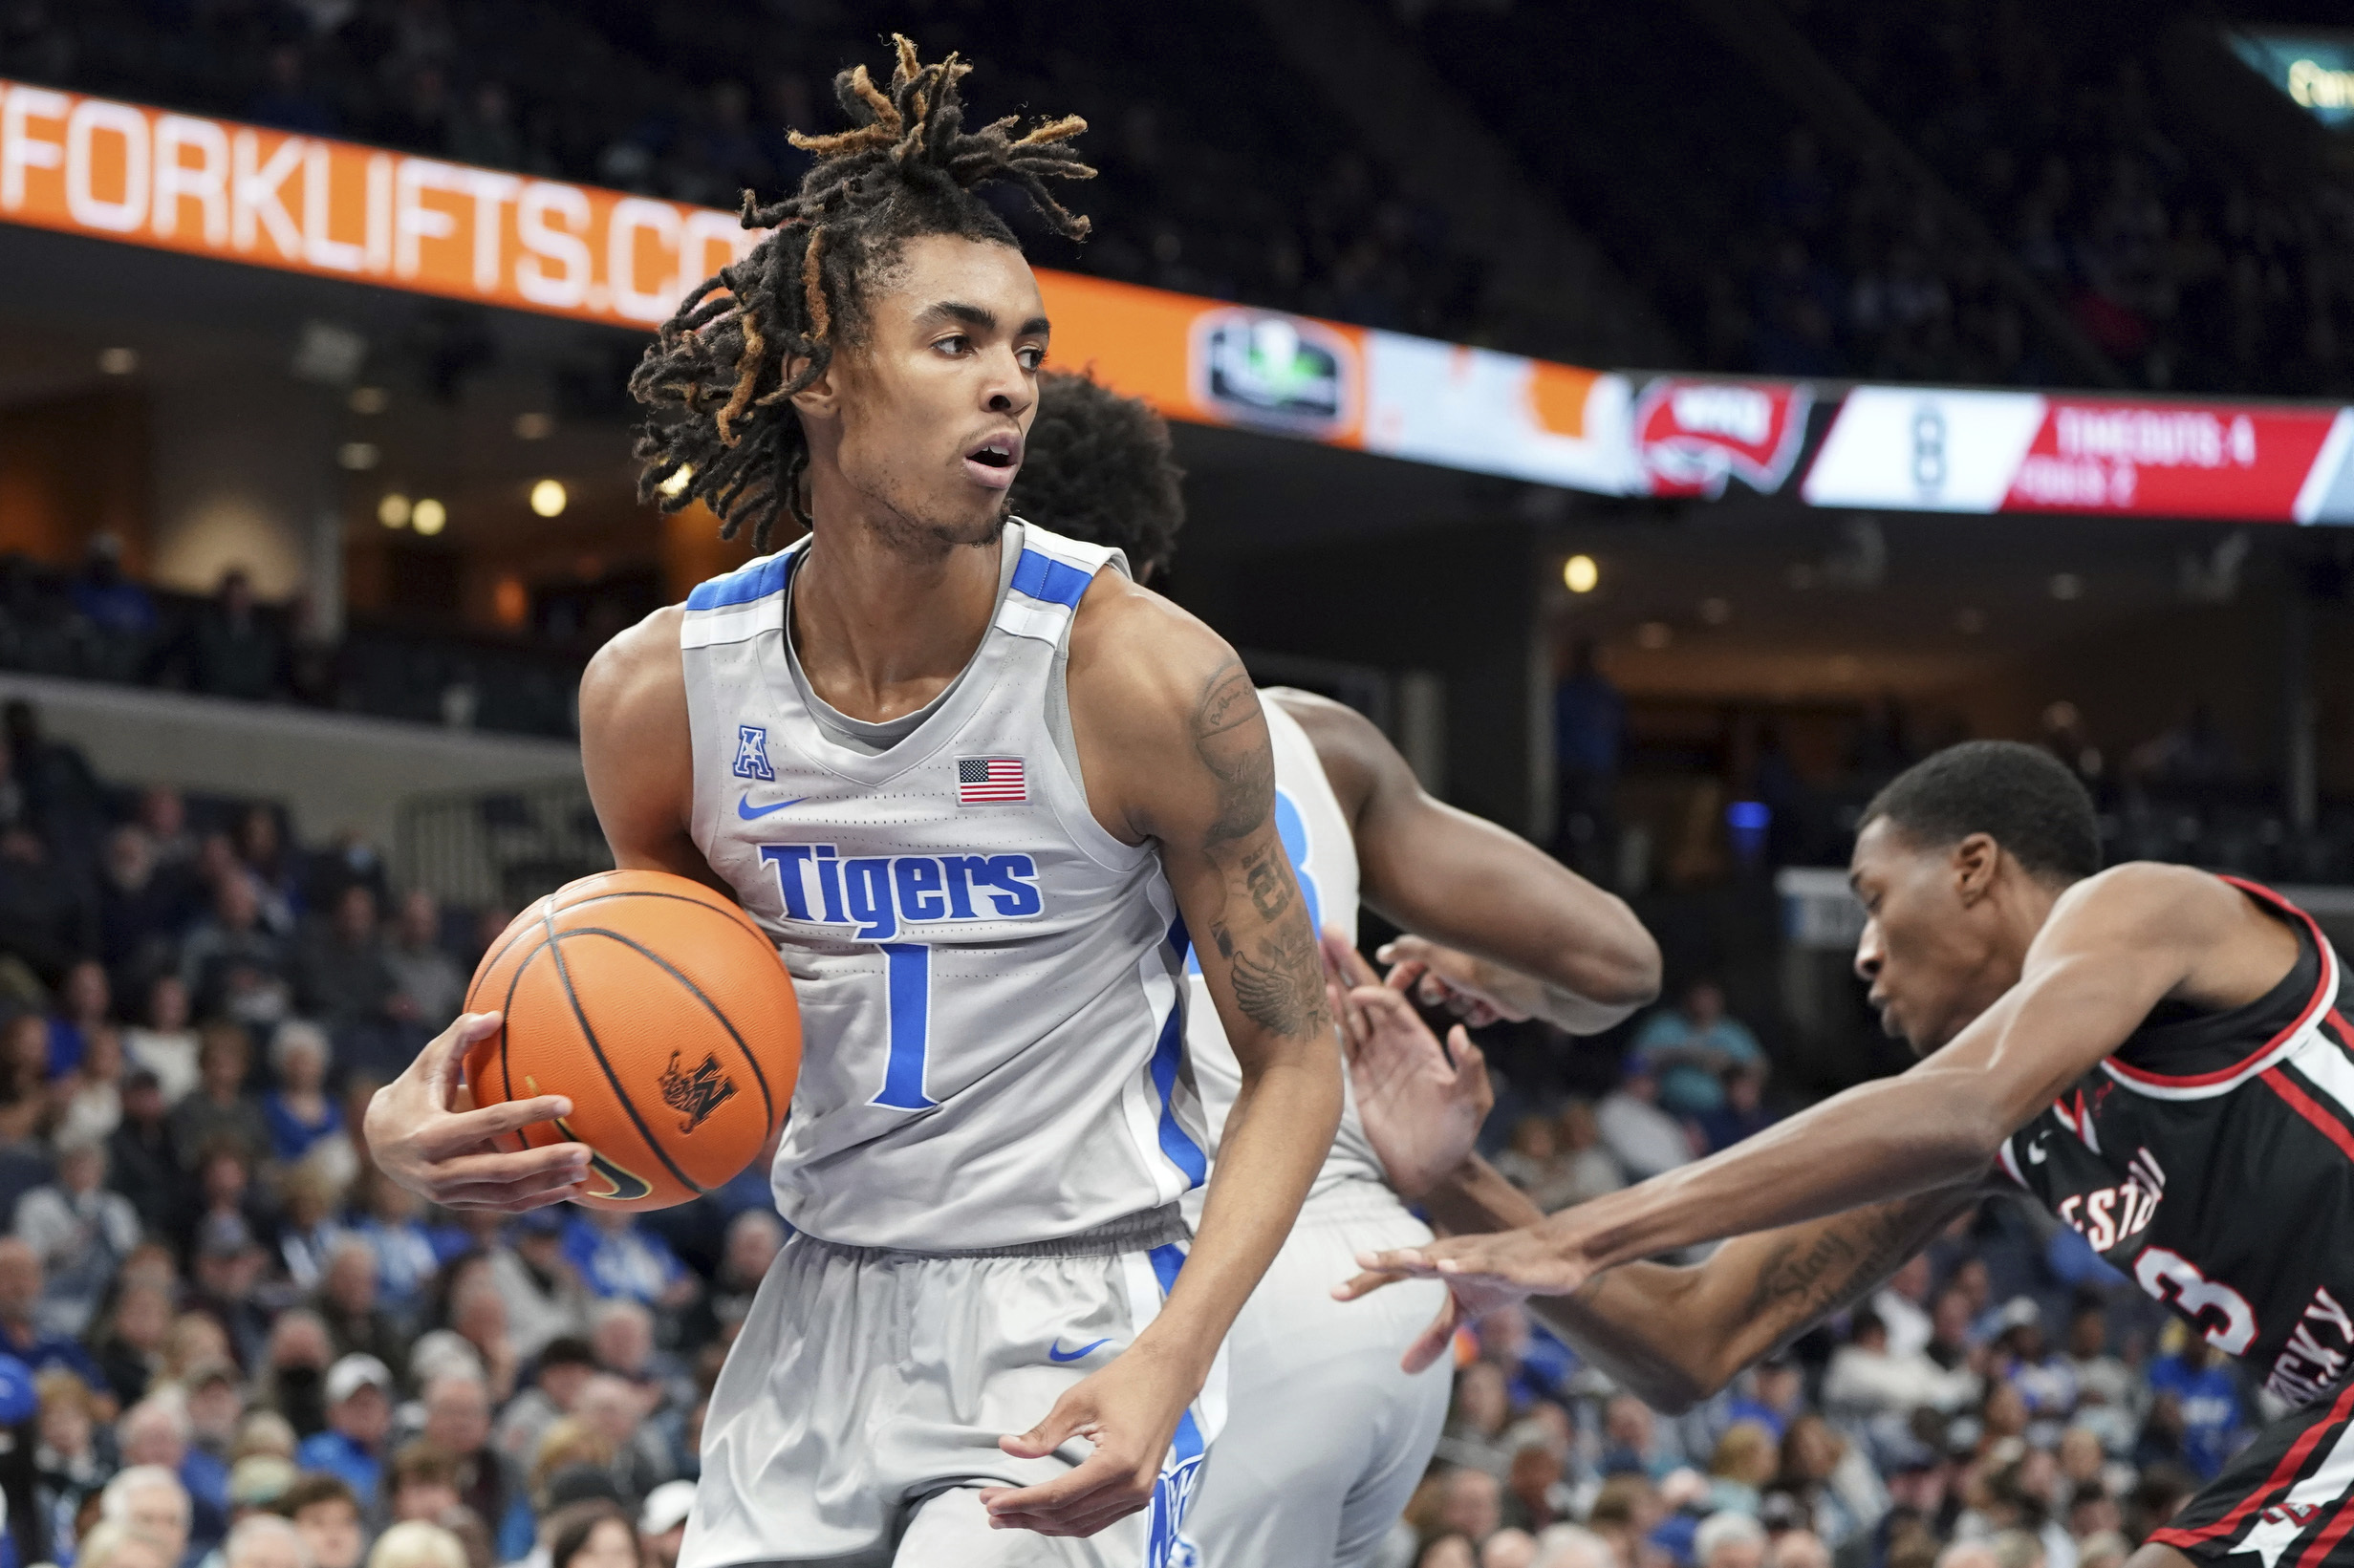 NBA Draft 2023 Prospects: Who are the top players of 2023 class